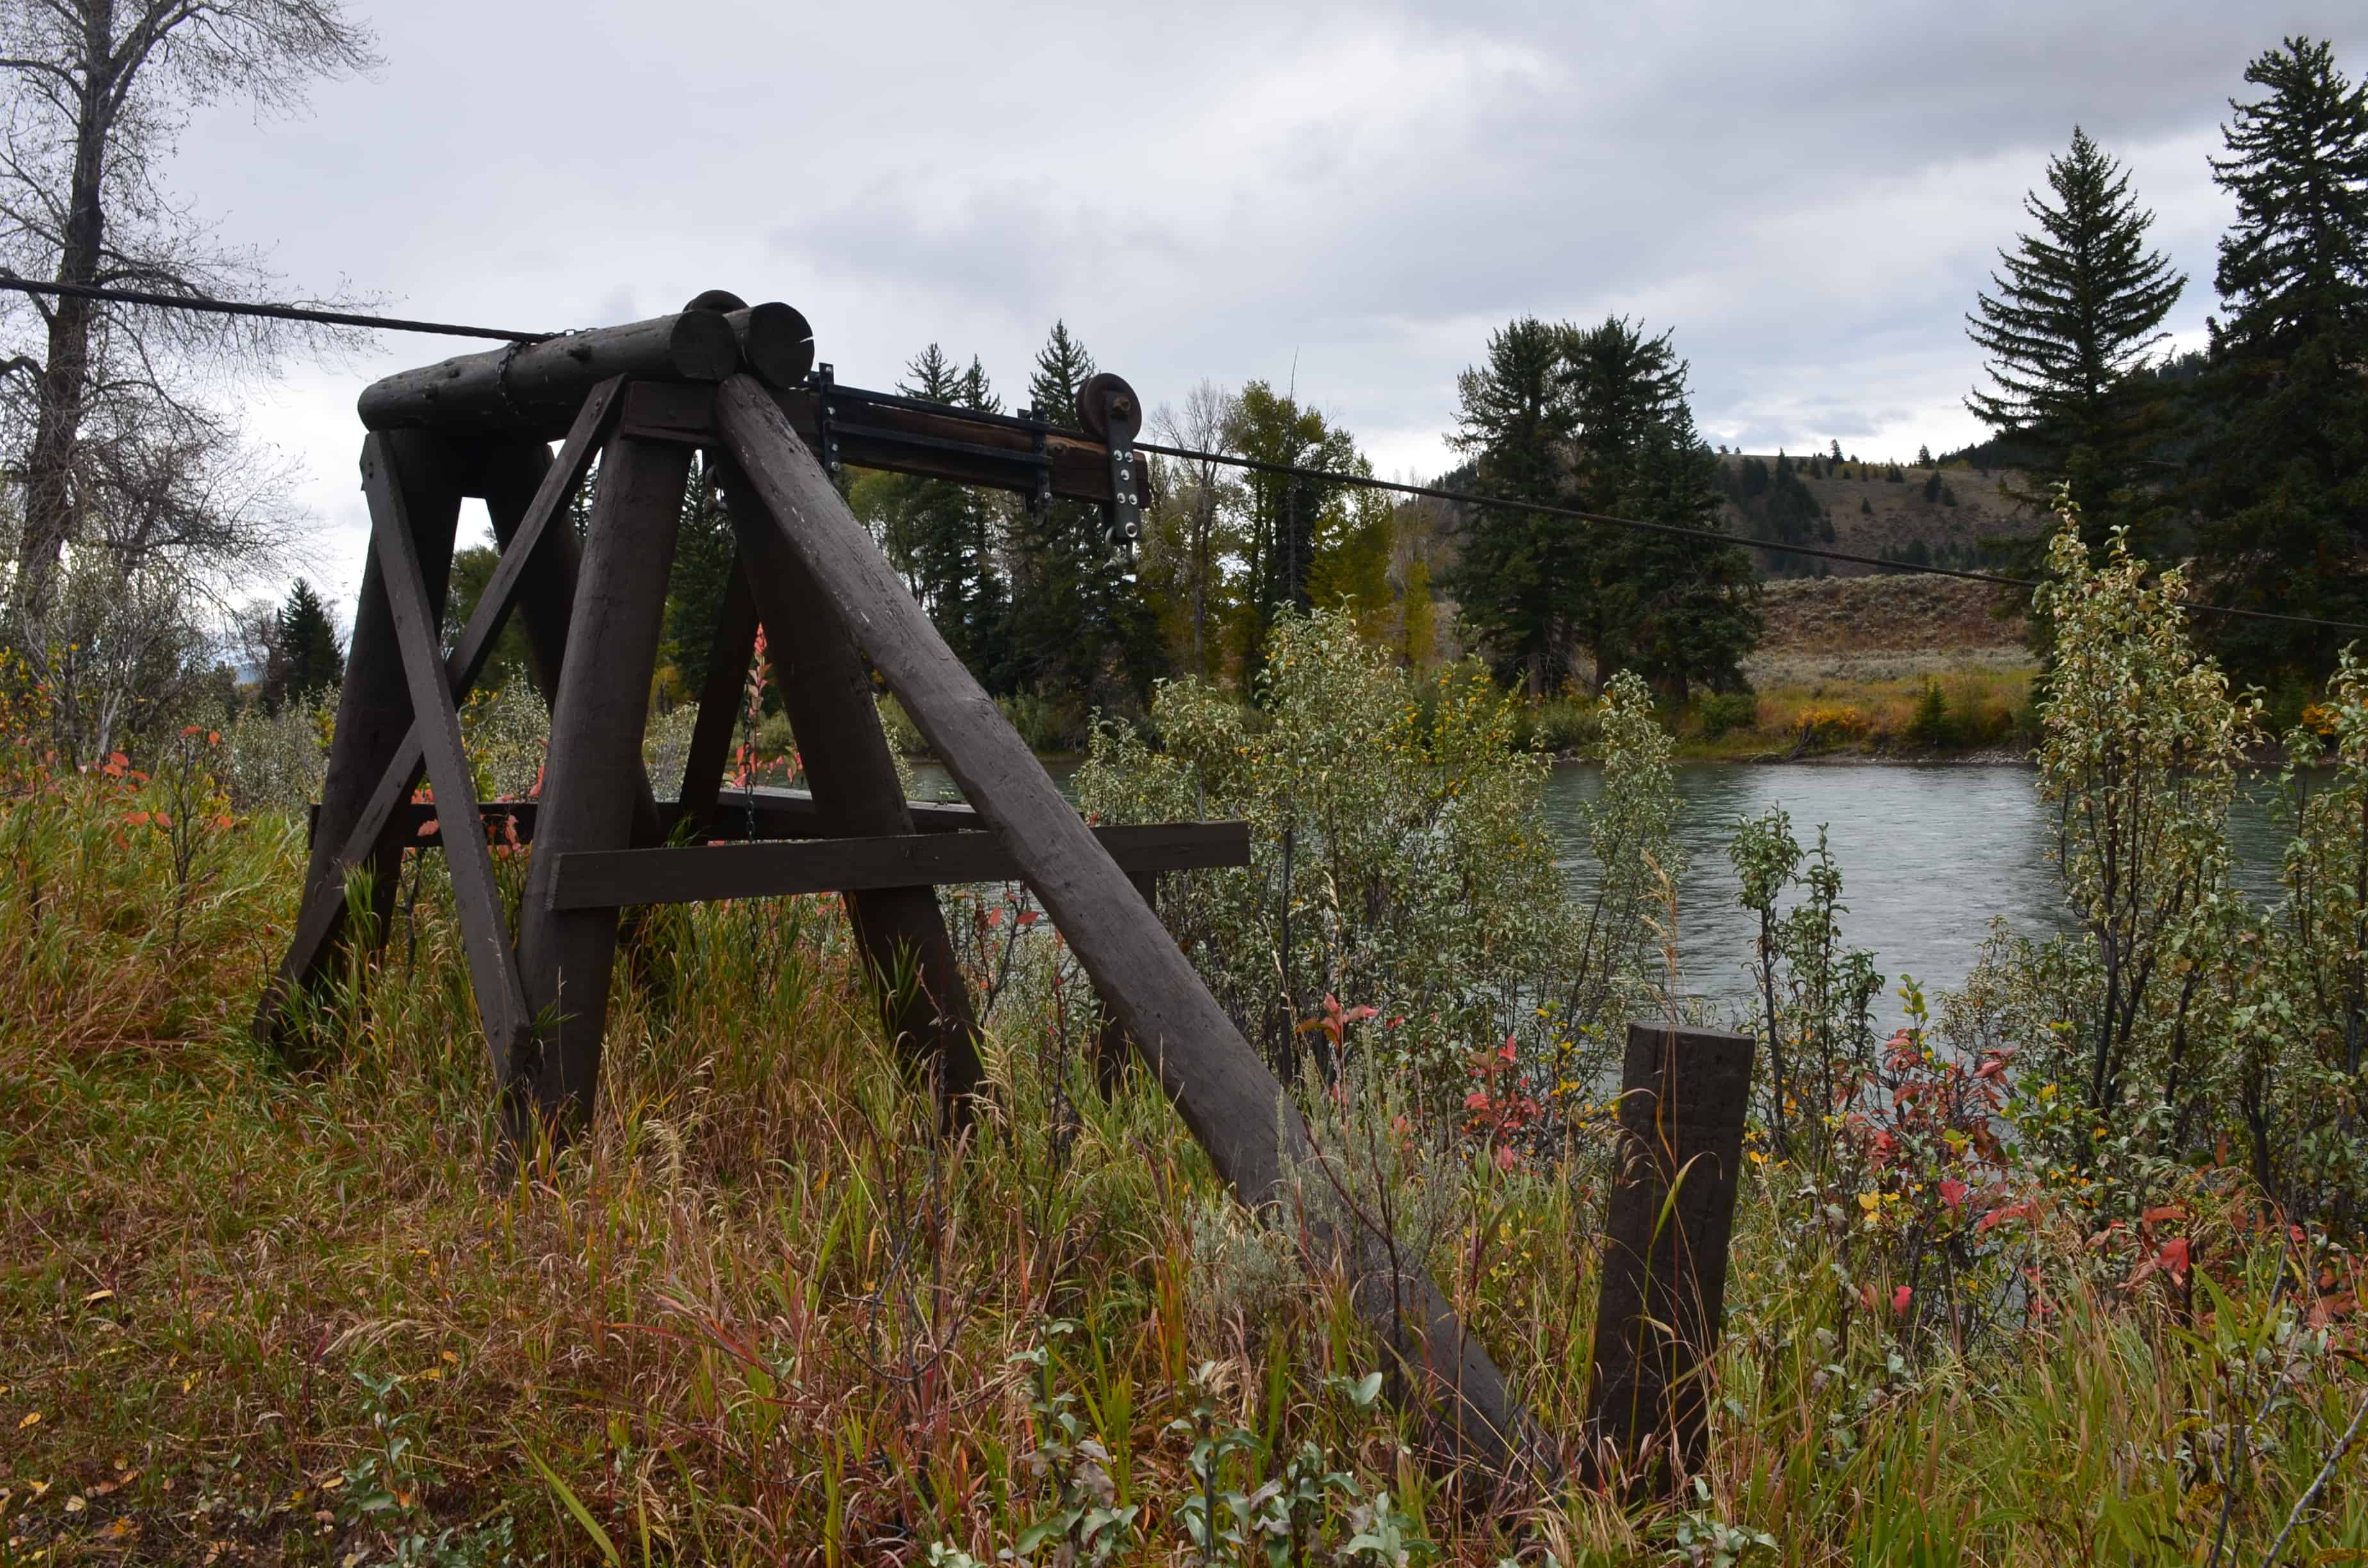 Cable works for Menor's Ferry at Menor's Ferry Historic District in Grand Teton National Park, Wyoming